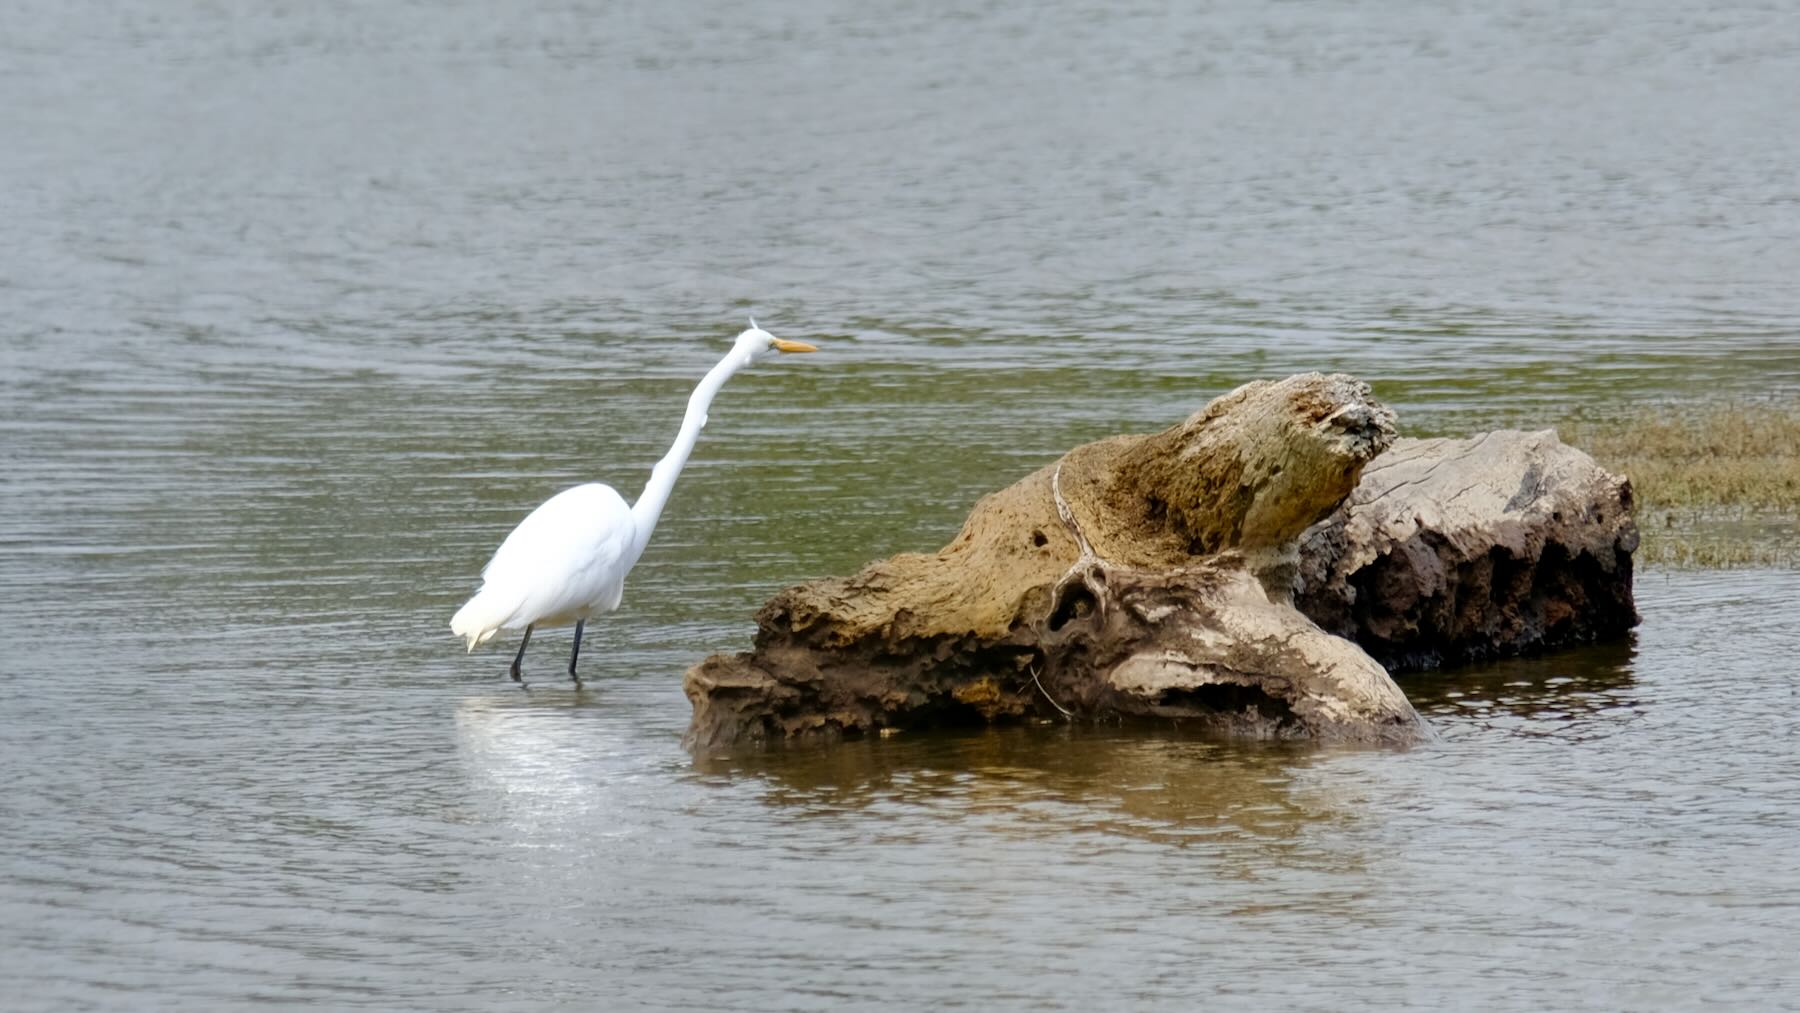 Large white bird with very long neck beside driftwood in water. 